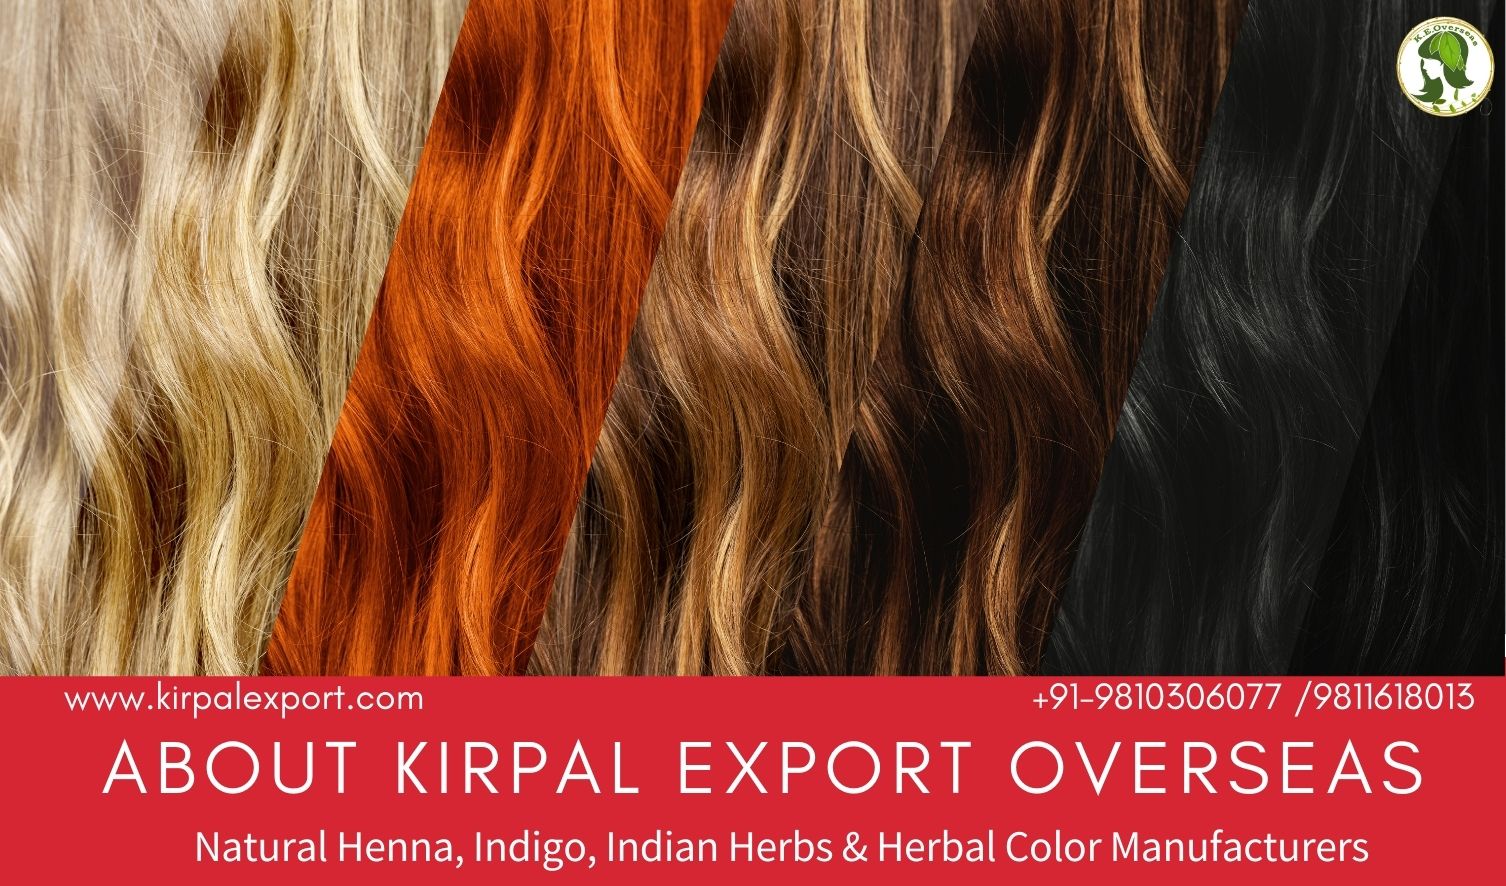 About Kirpal Export Overseas-Company Brief